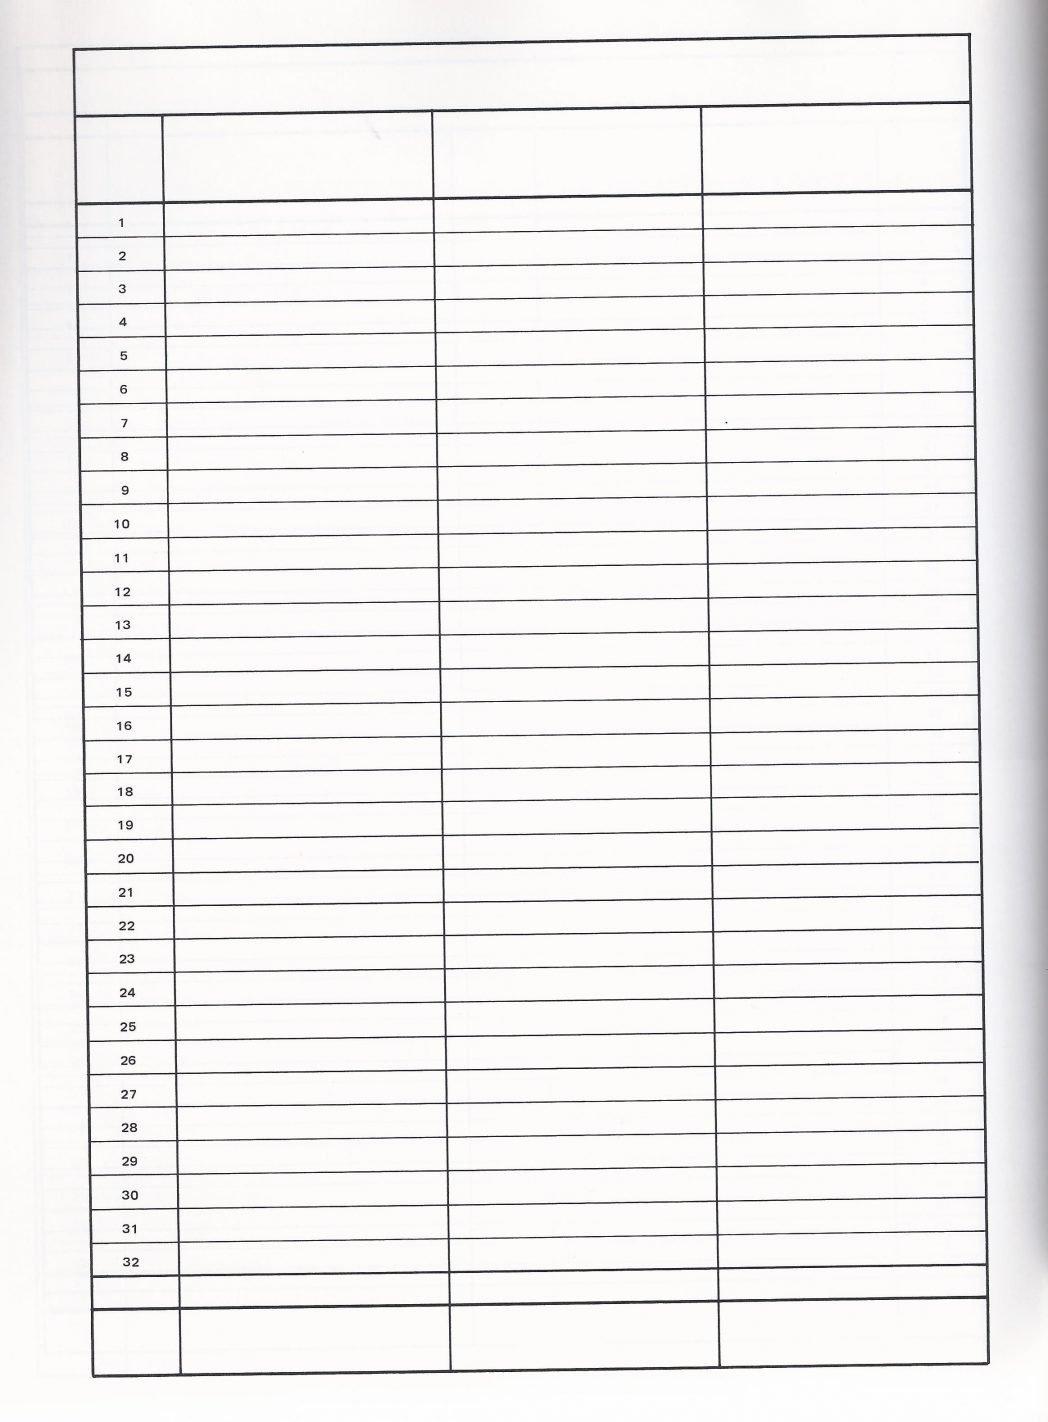 Blank Spreadsheet With Gridlines Pertaining To Blank Spreadsheet Printable Collections ~ Epaperzone